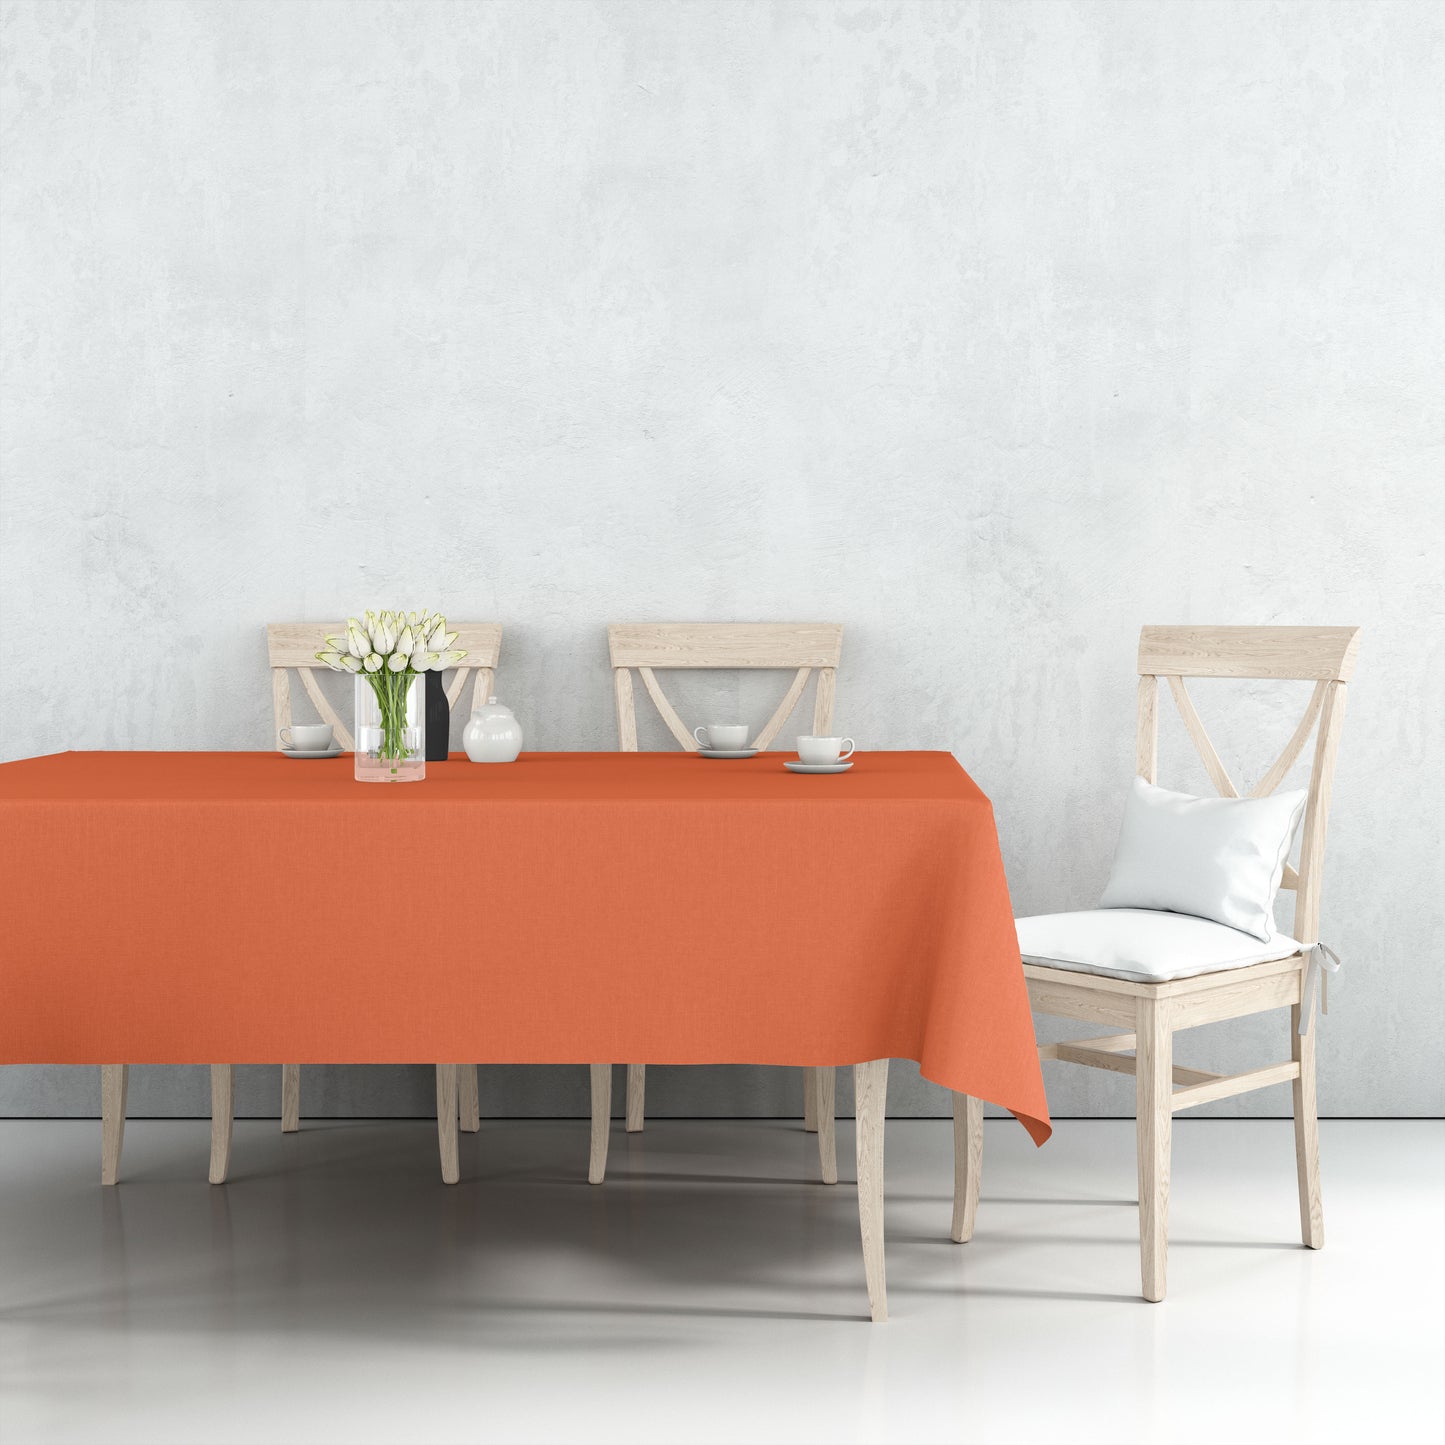 Tablecover Plastic Orange Rectangular  54'' X 108'' Tablesettings Party Dimensions   